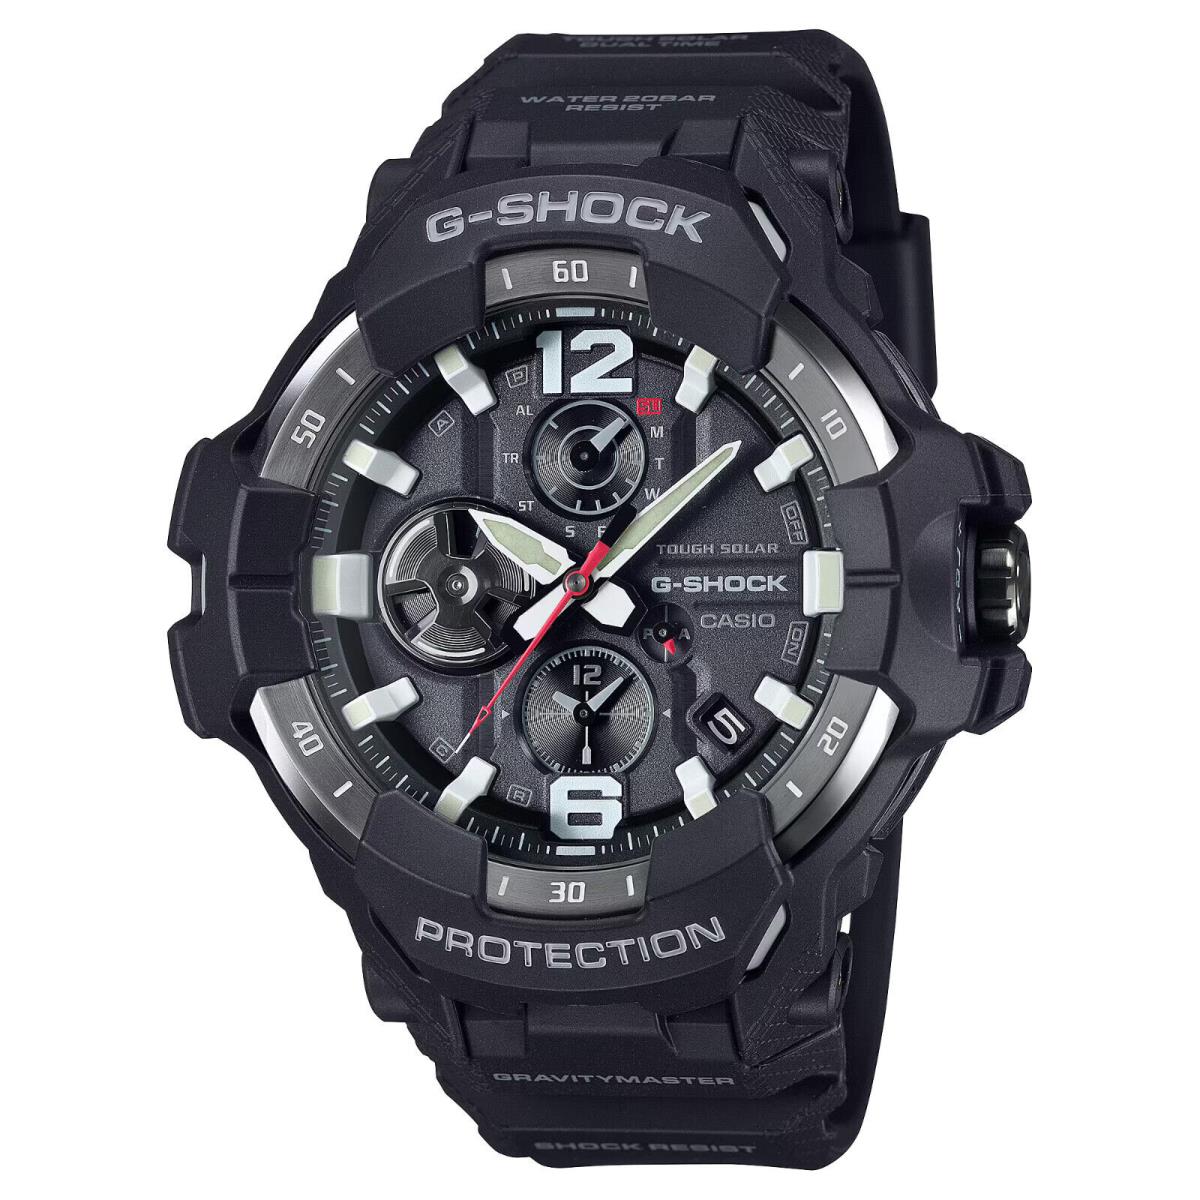 Casio G-shock Gravity Master Black Resin Band Watch GRB300-1A